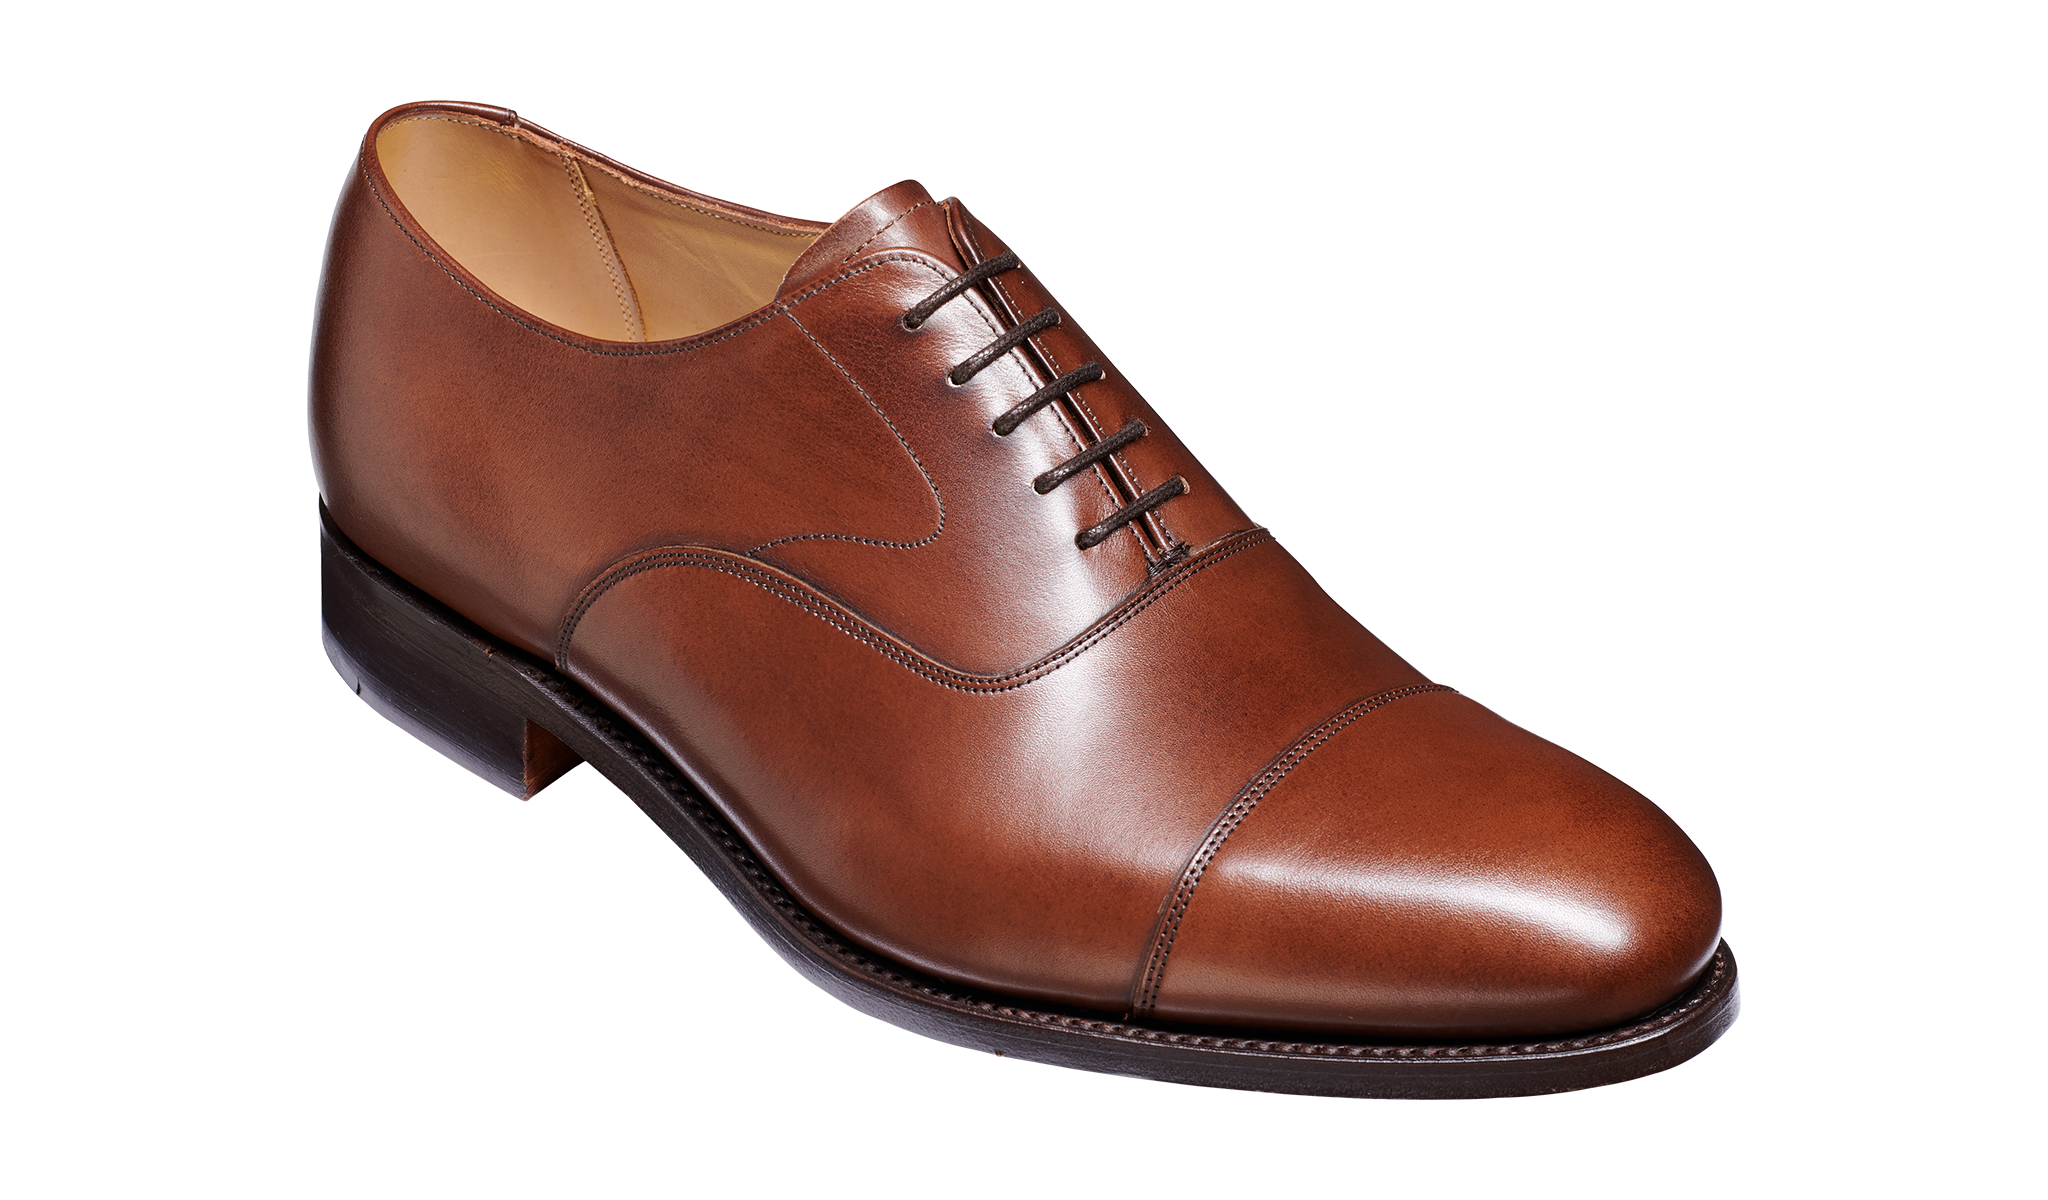 Malvern - Man's Handmade Brown Leather Oxford Shoes From Barker